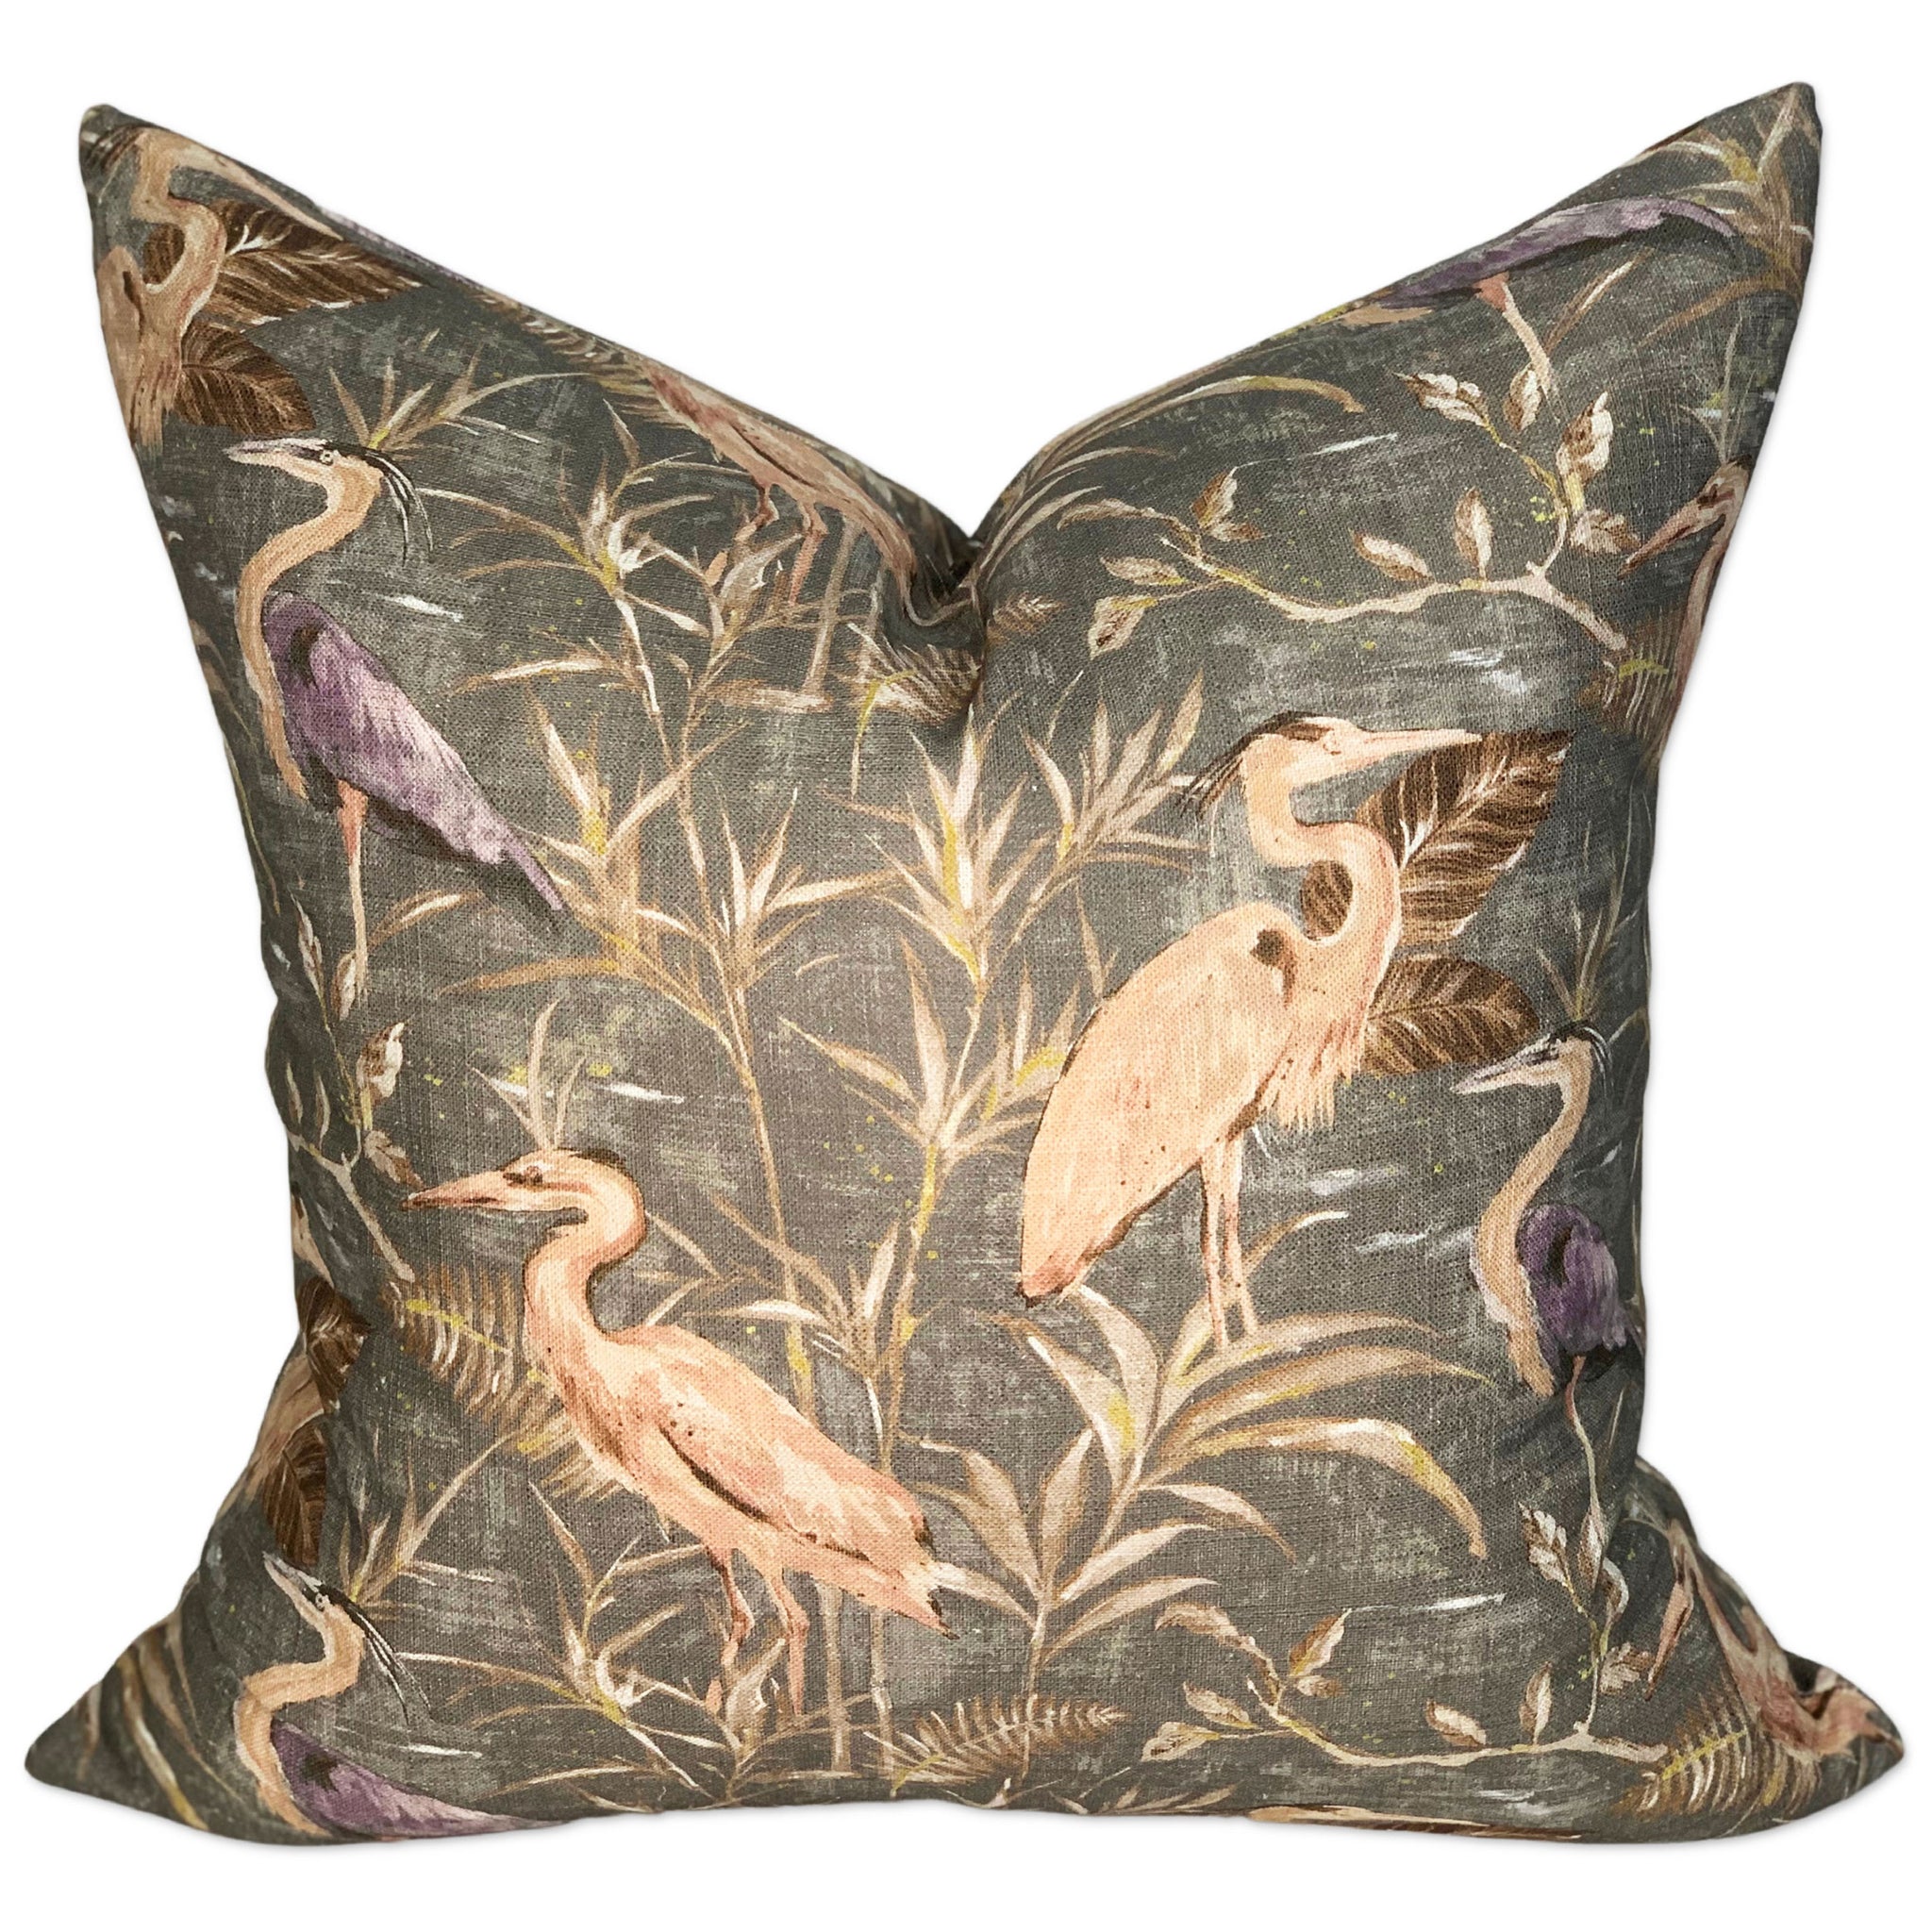 Heron Pillow Cover in Silt